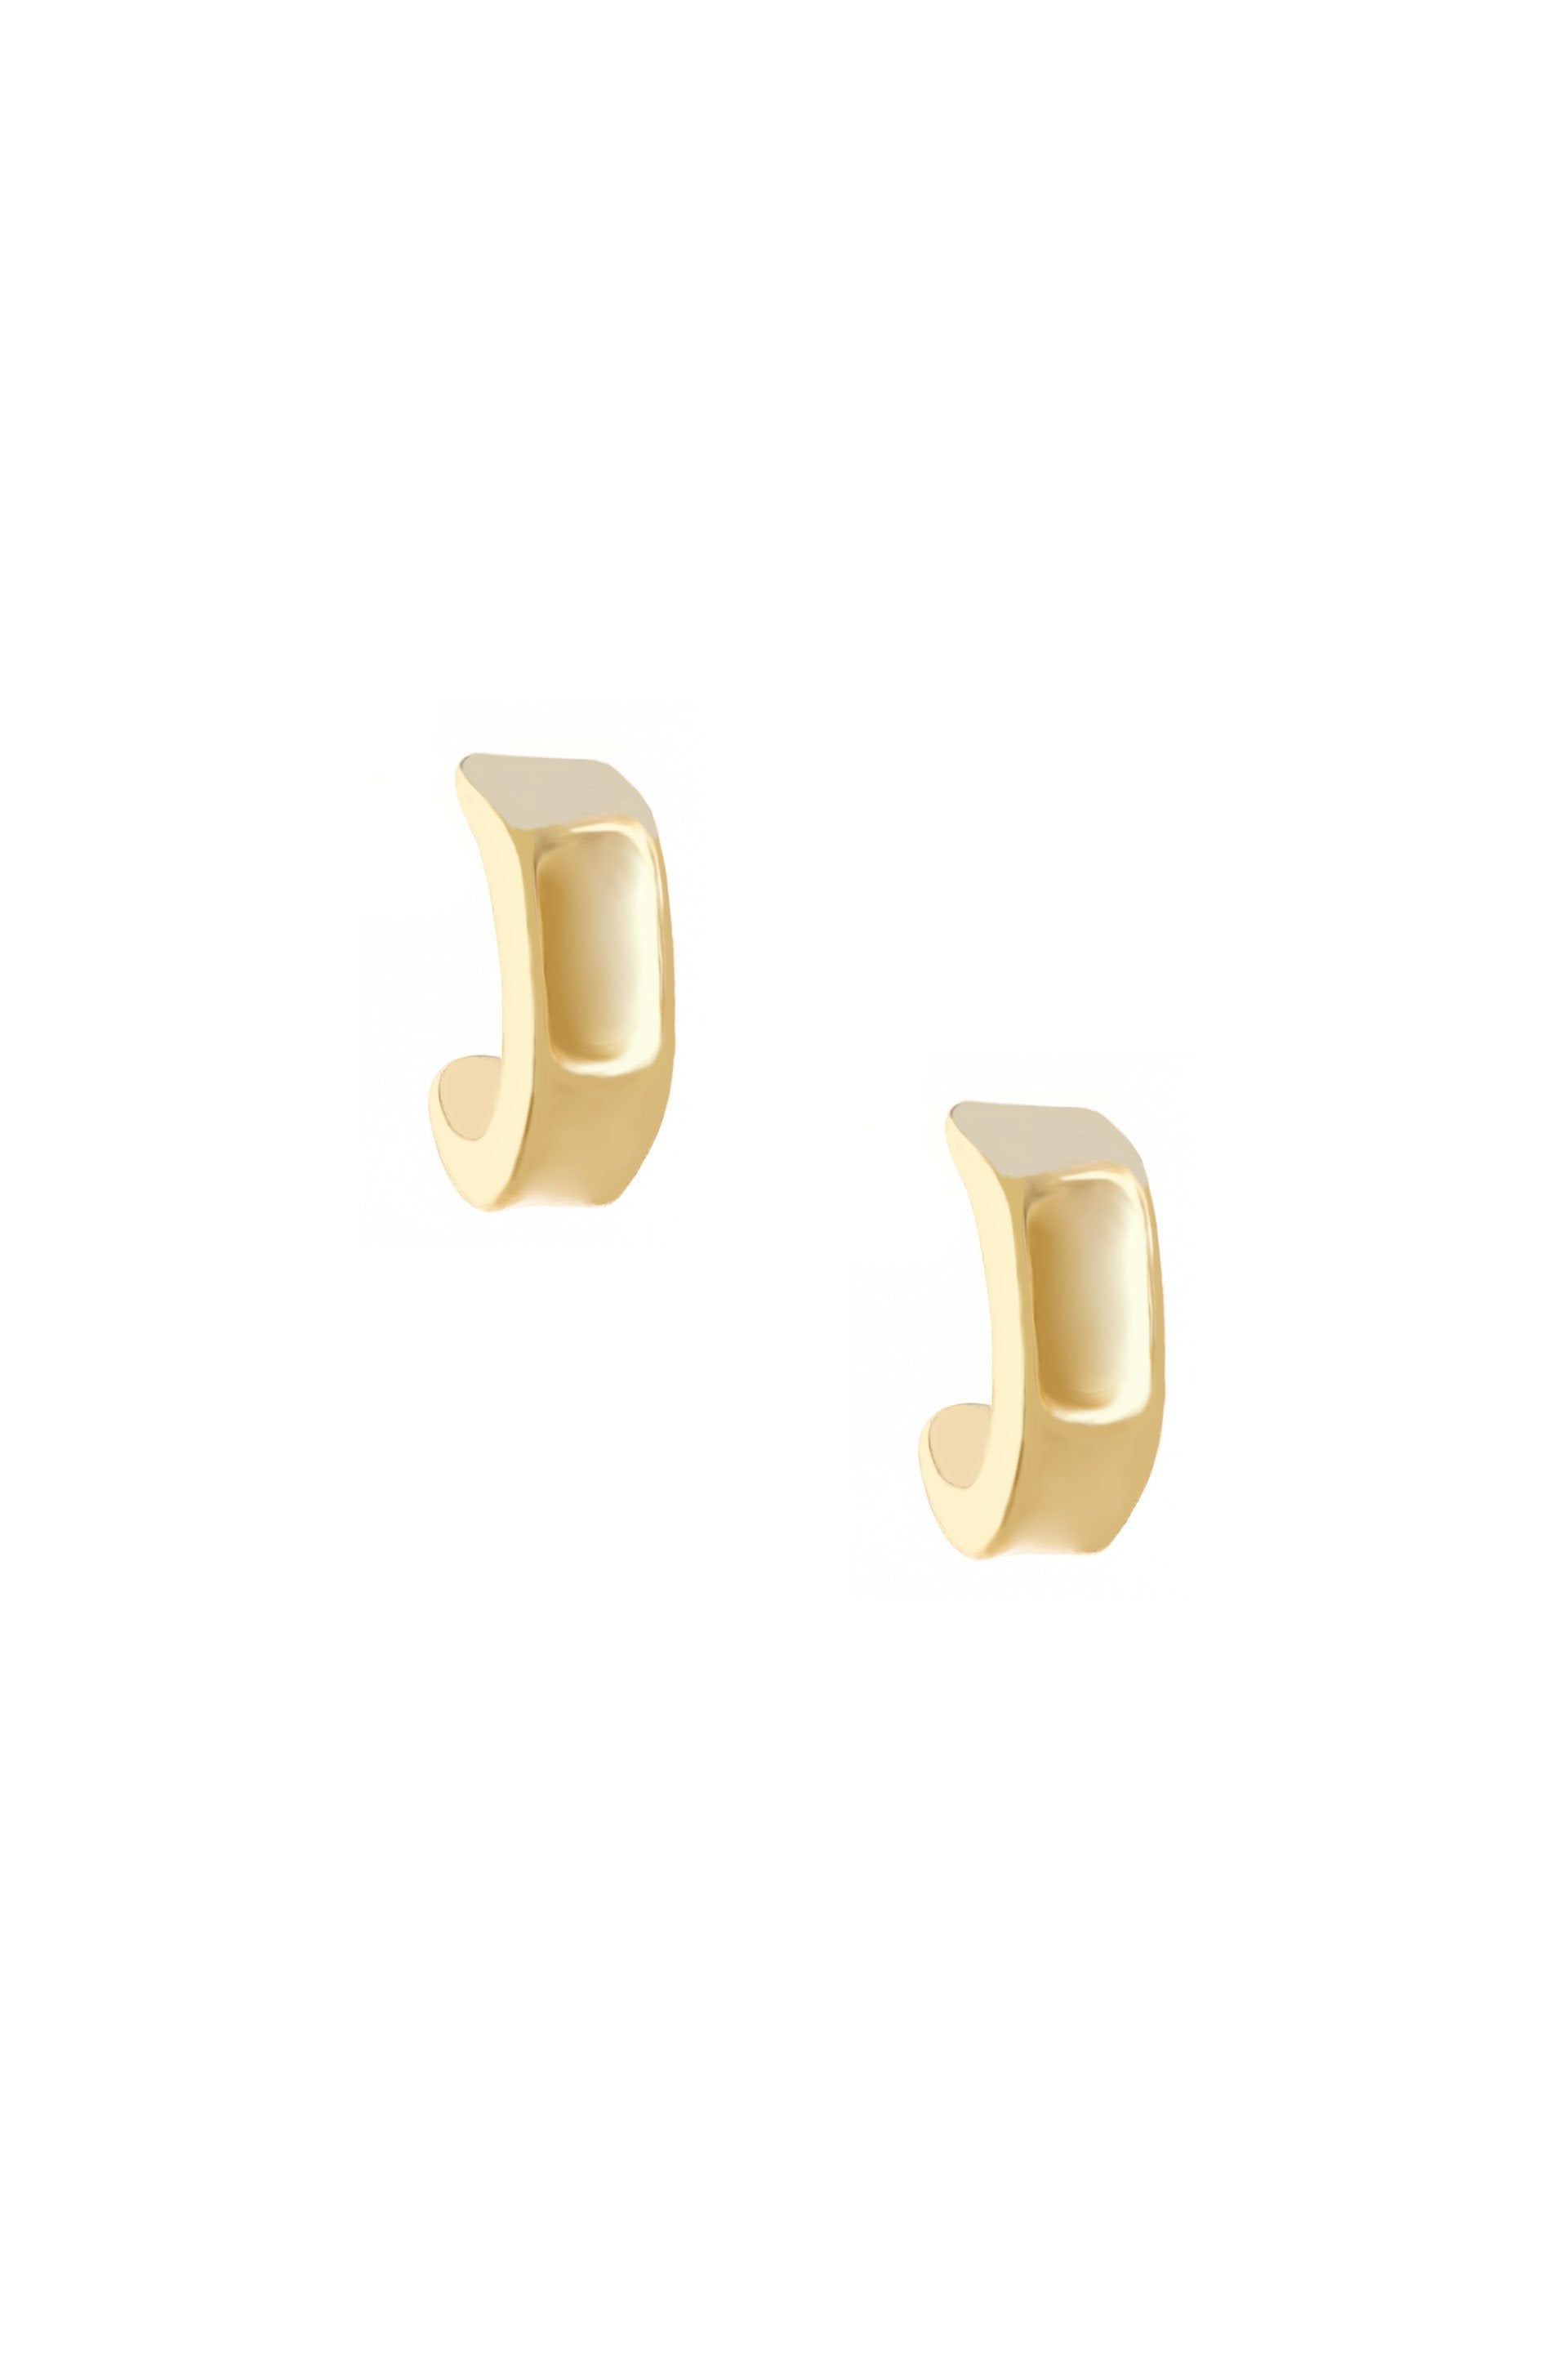 Miss Modern Mini 18k Gold Plated Half Hoops on white background  